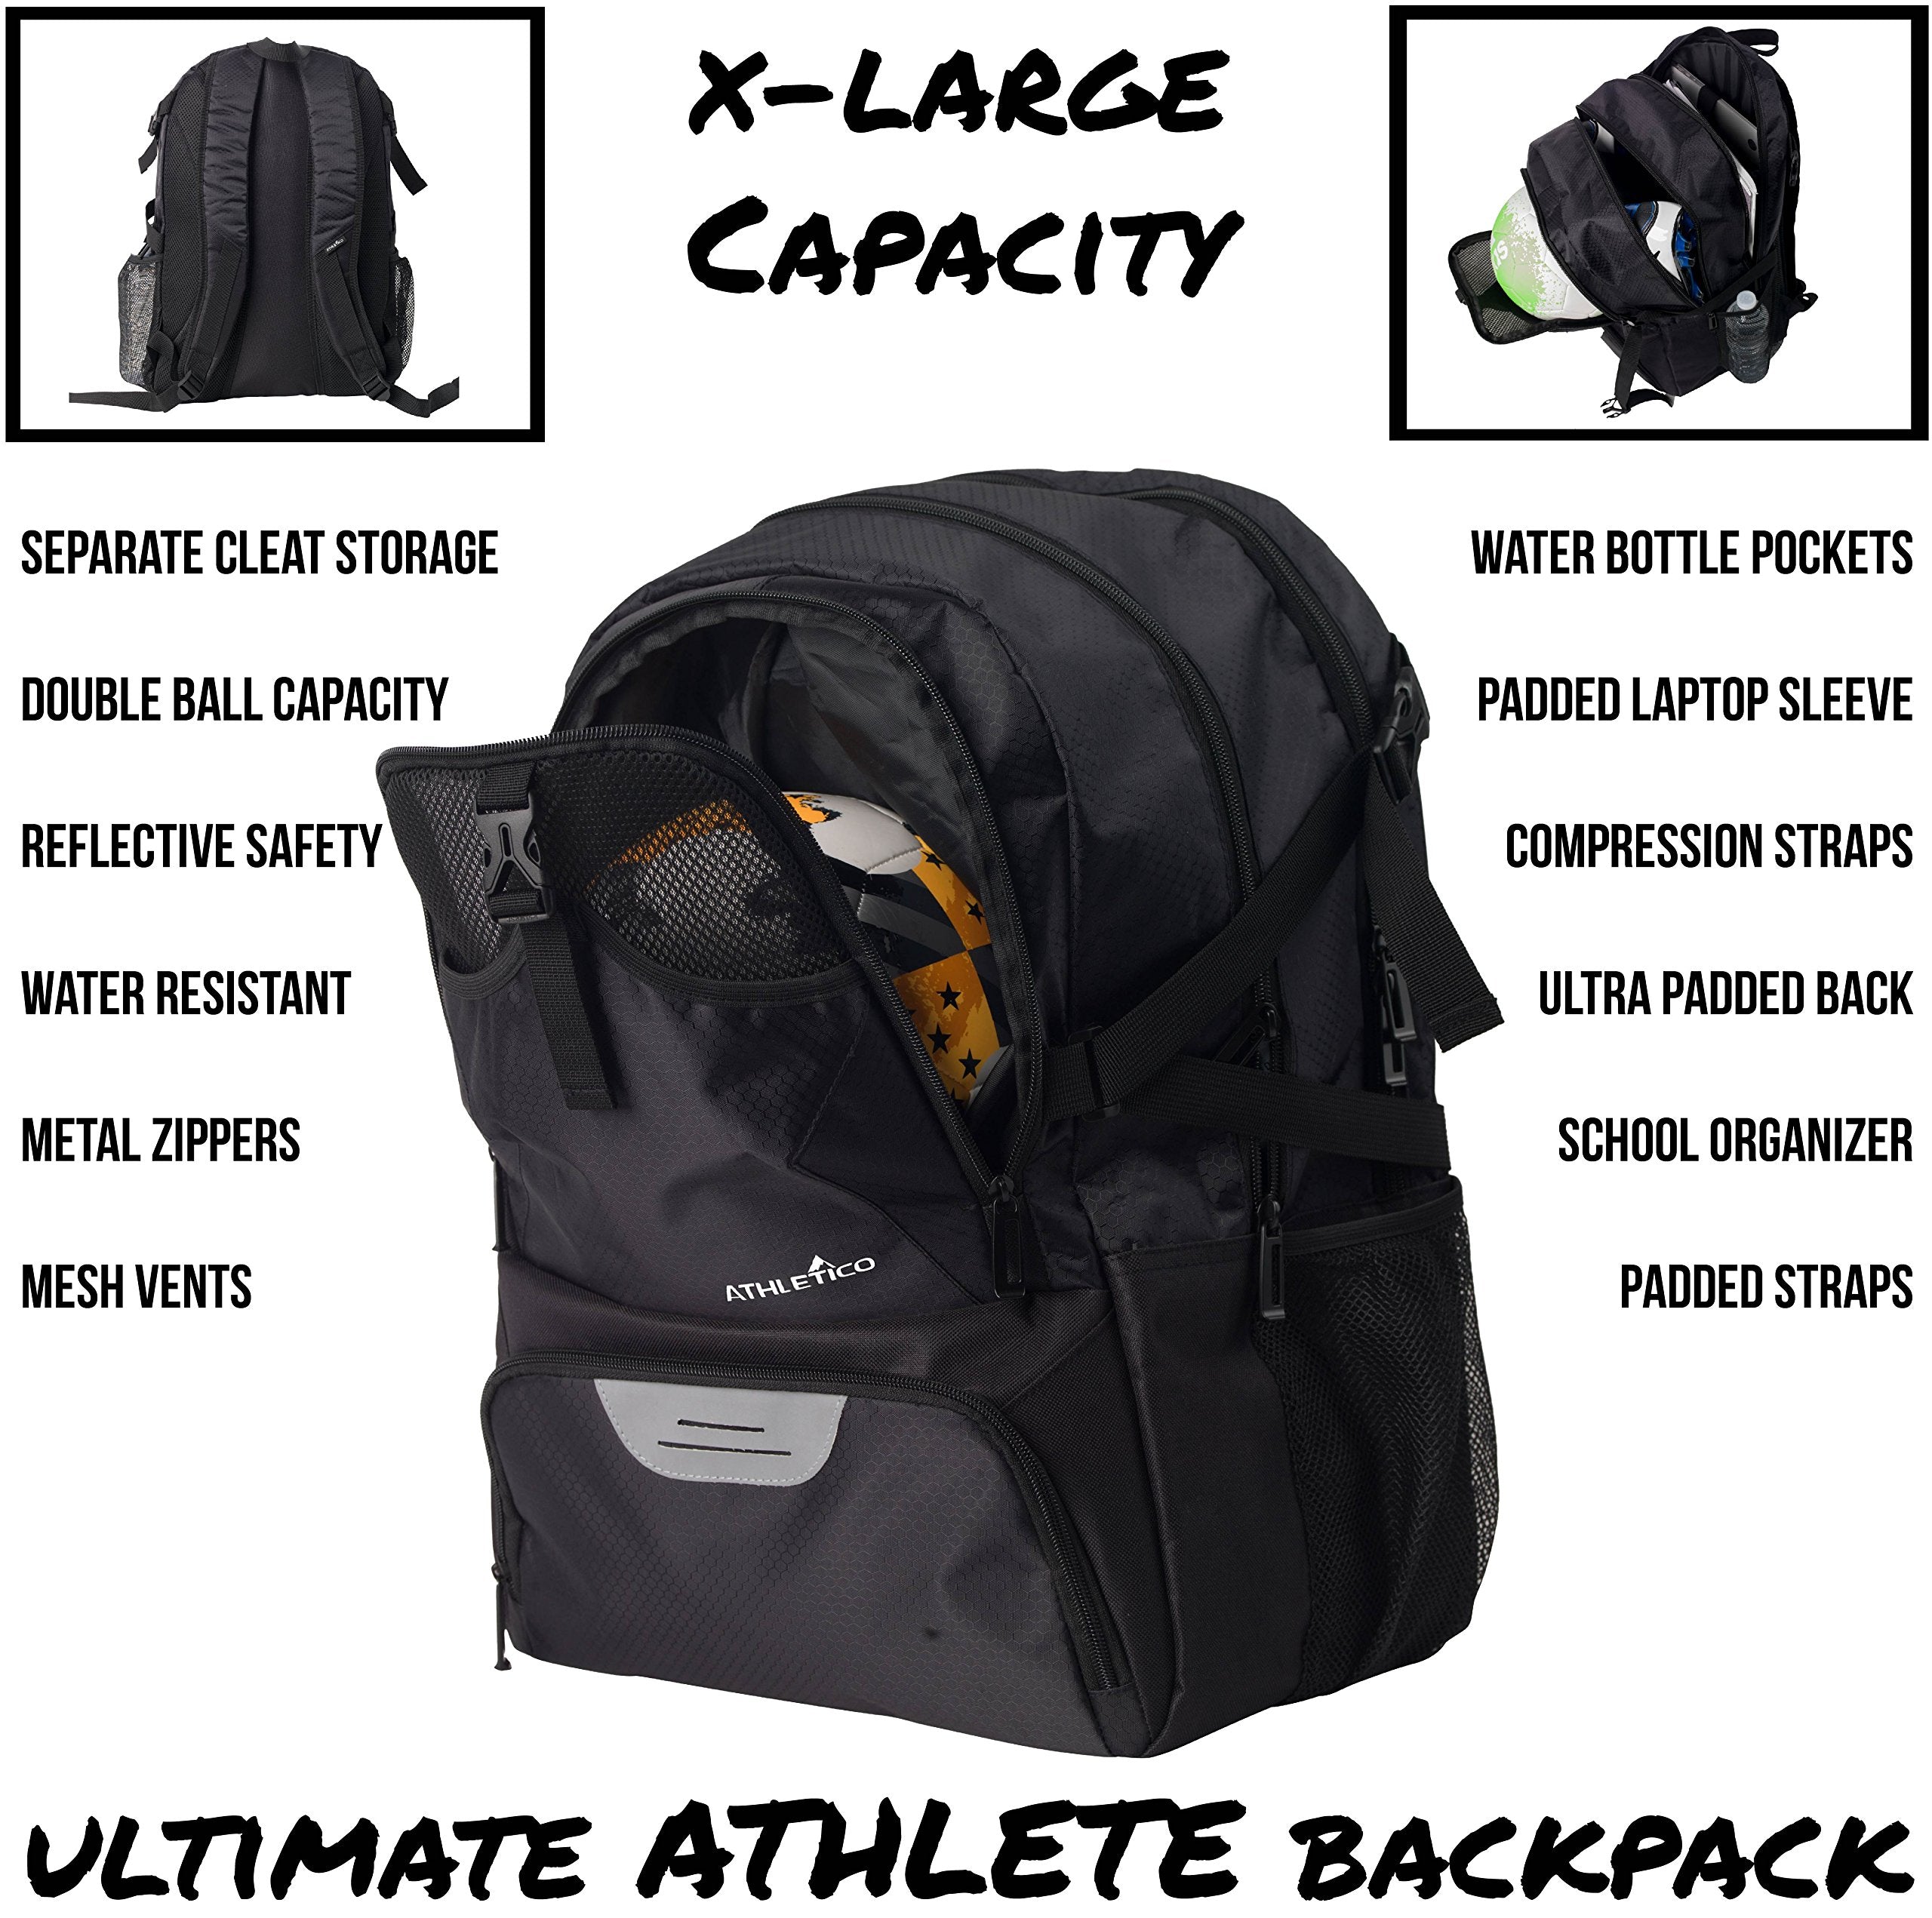 Athletico National Soccer Bag - Backpack for Soccer, Basketball & Football Includes Separate Cleat and Ball Holder (Black)